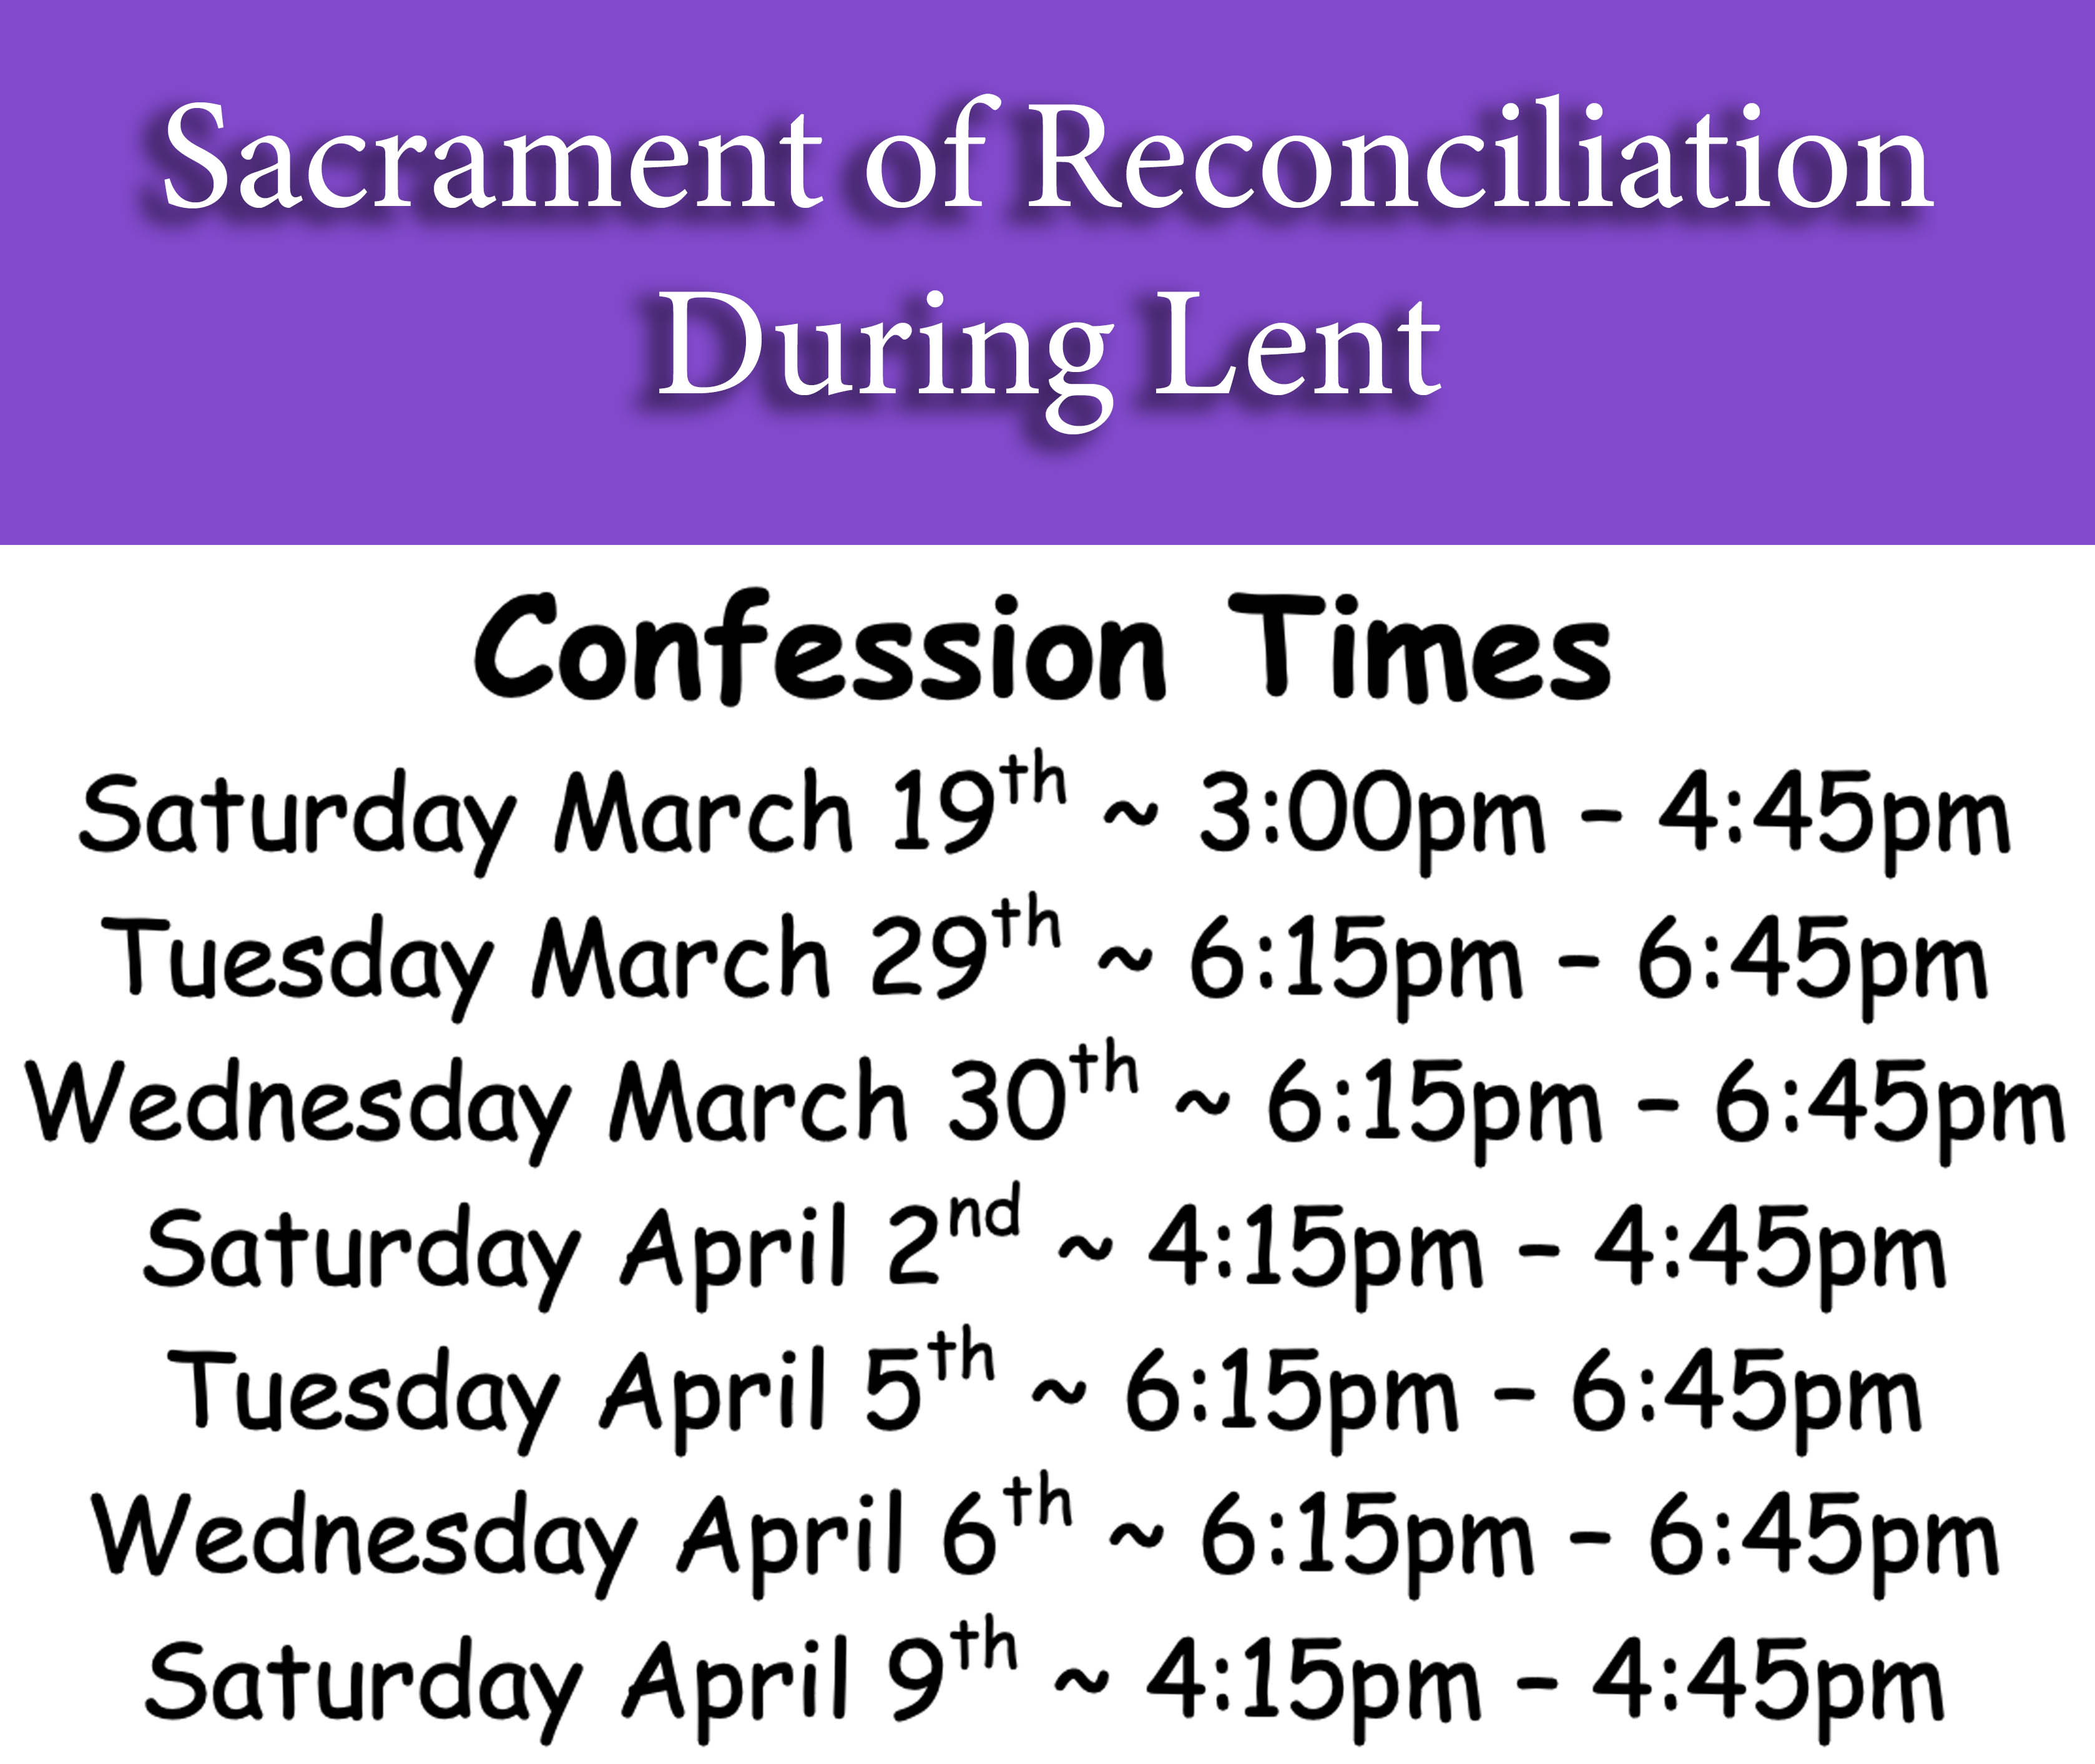 Confessions during Lent